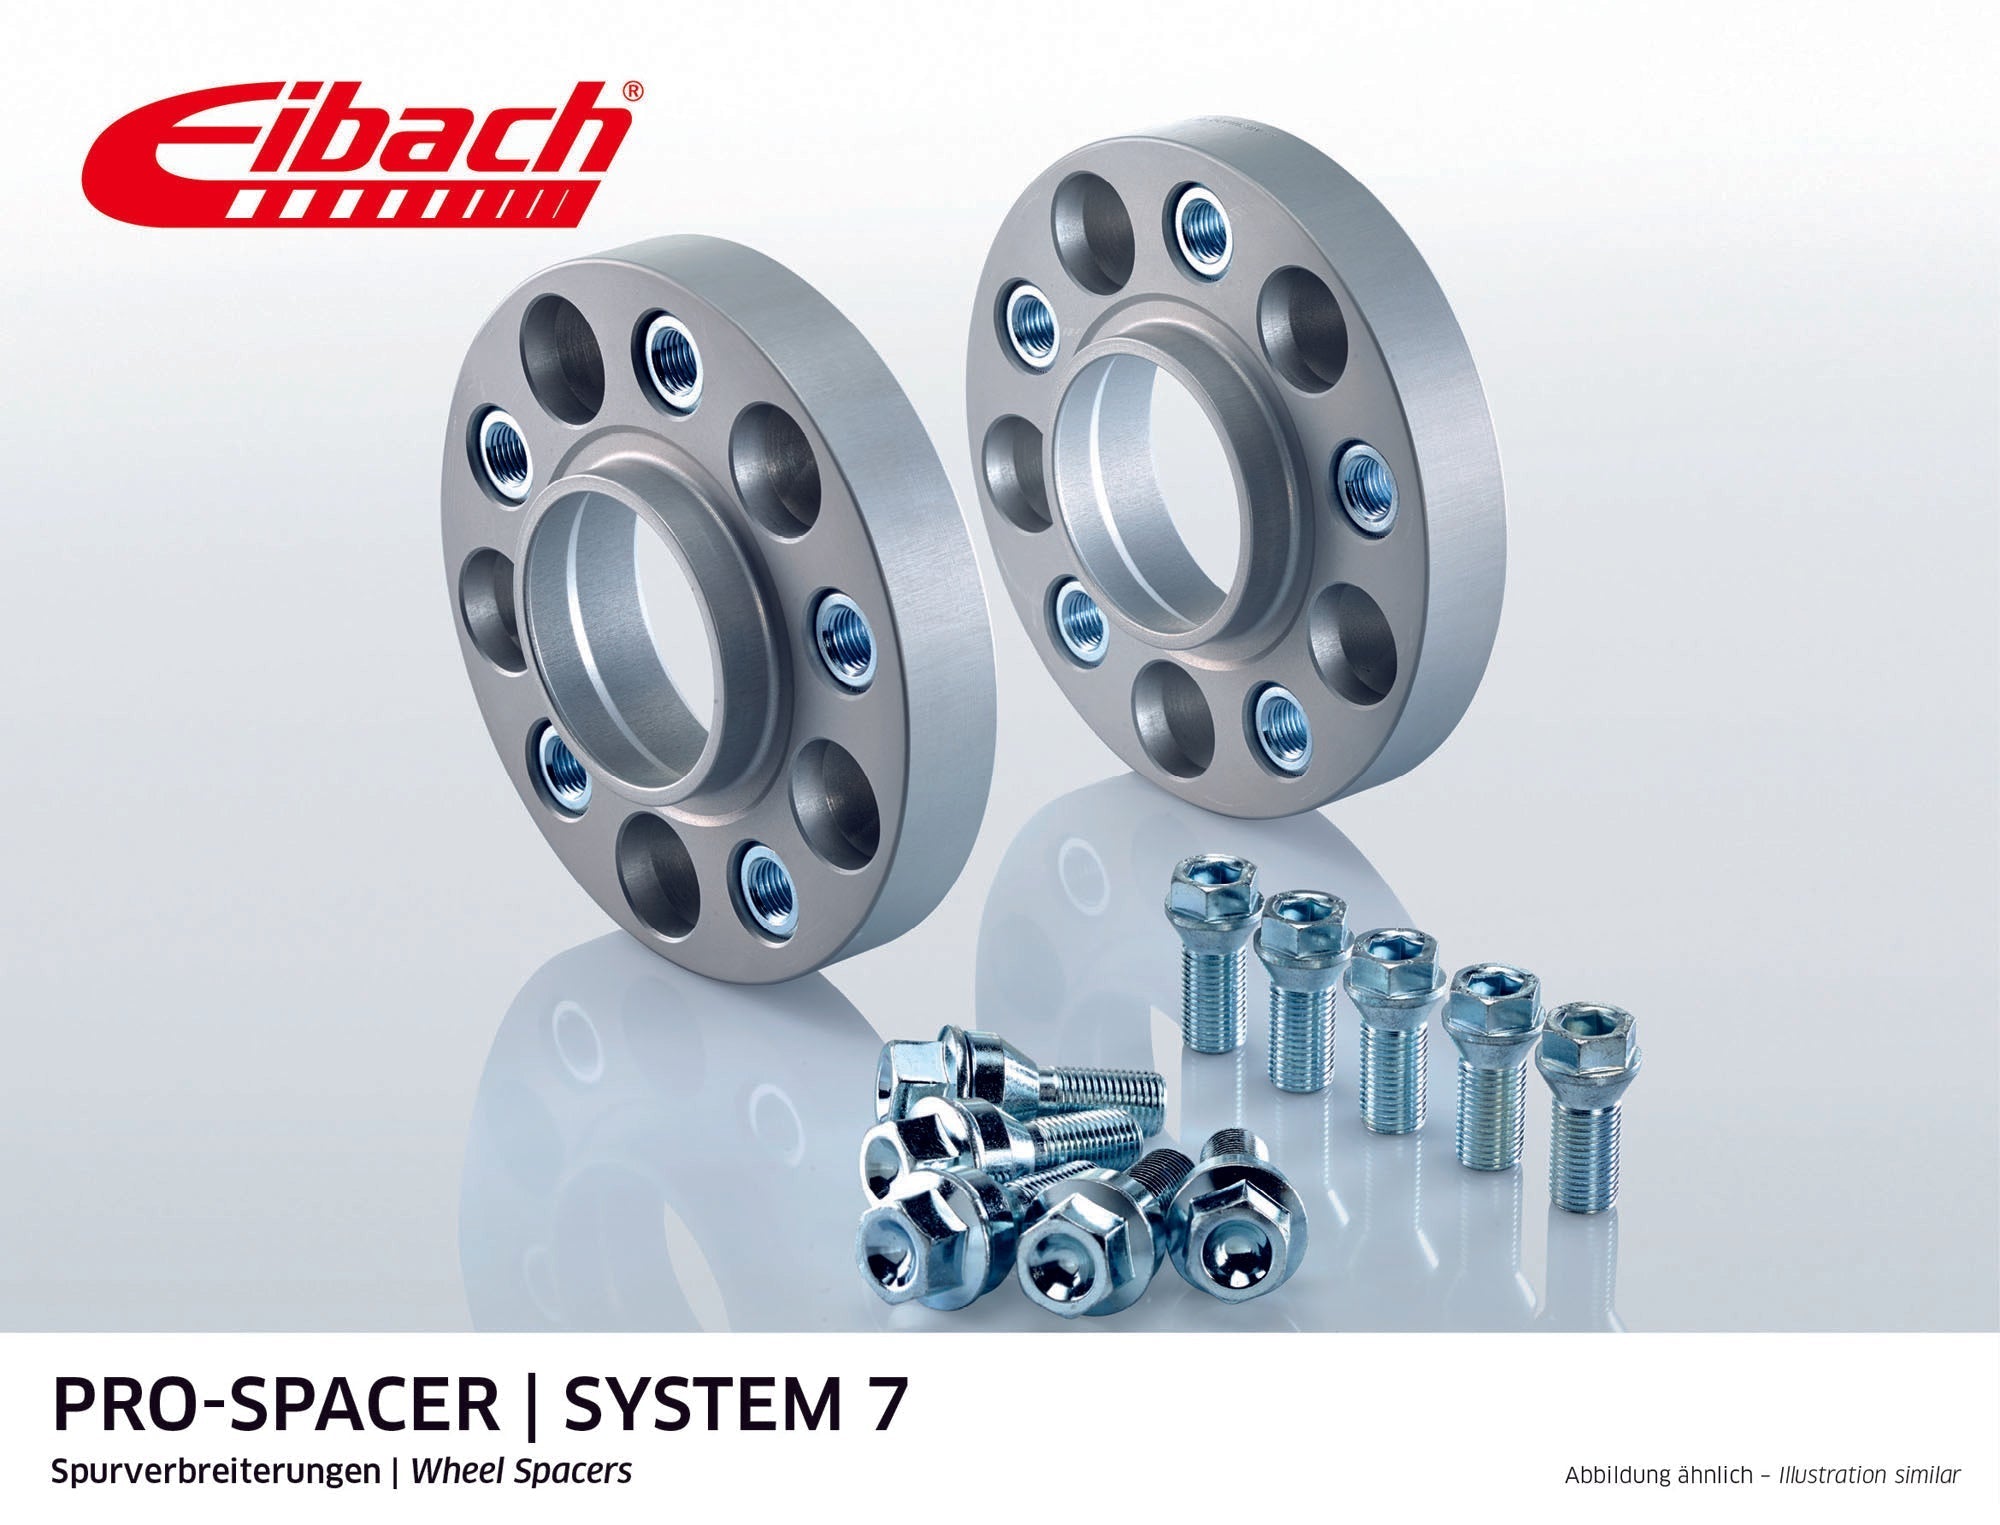 Eibach 23mm Pro-Spacer - Silver Anodized Wheel Spacer 911 2004-12 #S90-7-23-001